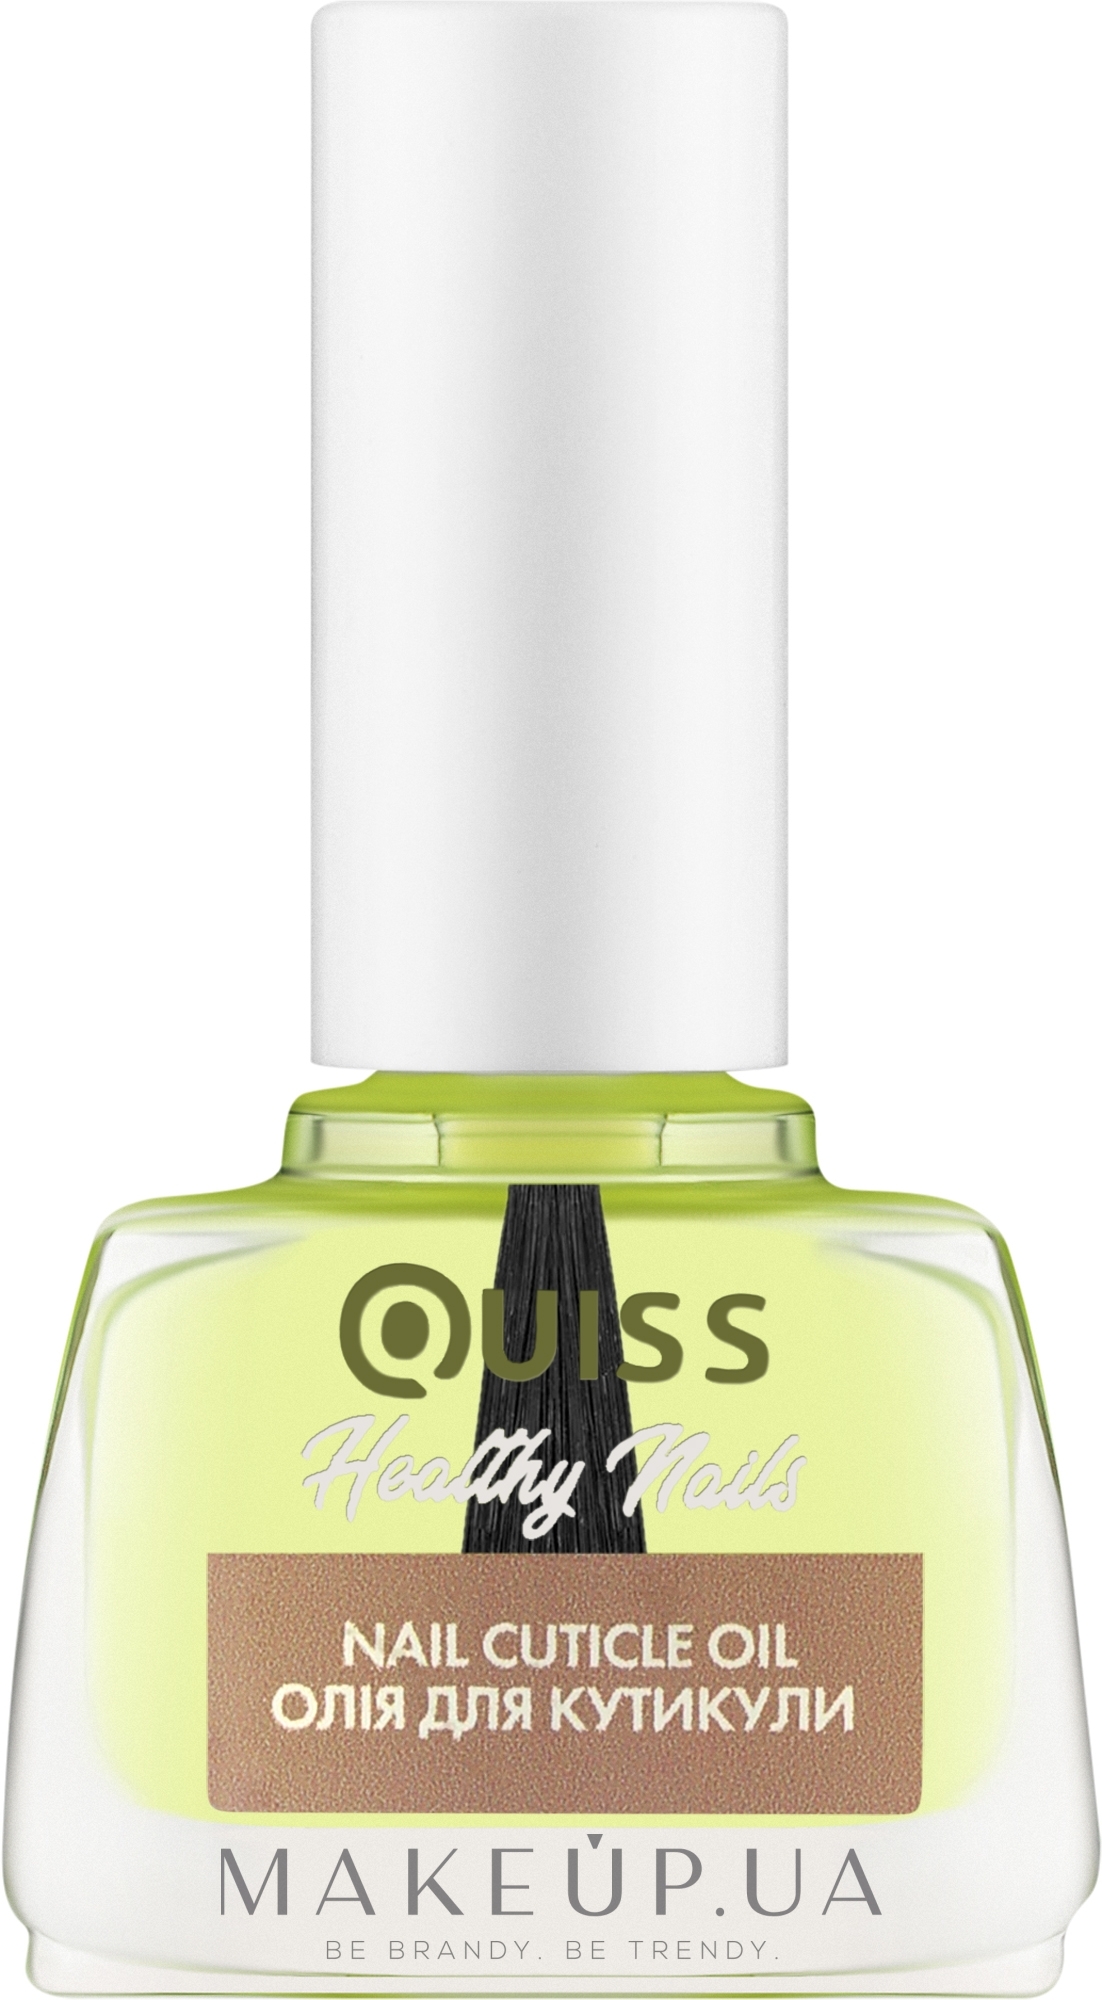 Масло для кутикулы - Quiss Healthy Nails №8 Nail Cuticle Oil — фото 8g